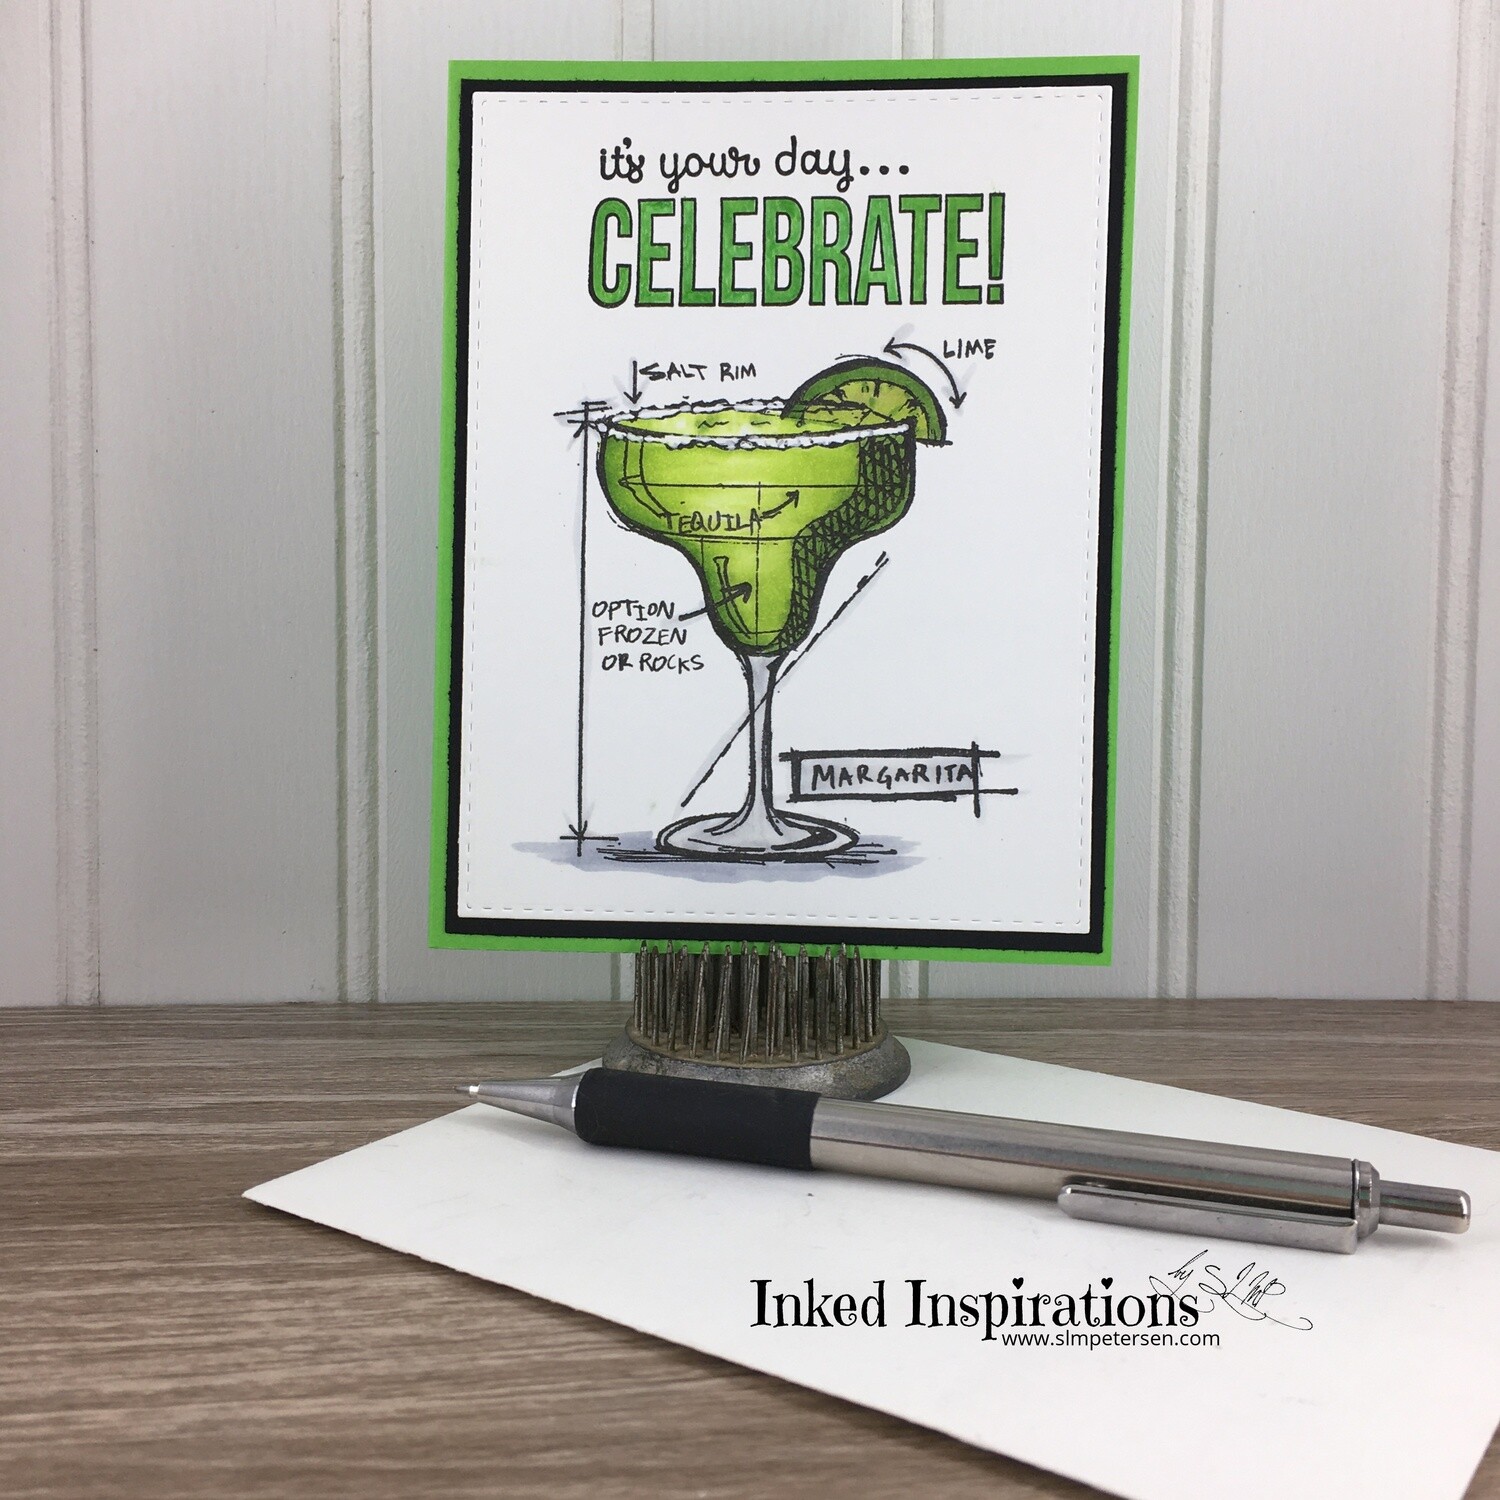 It's Your Day...Celebrate! - Margarita